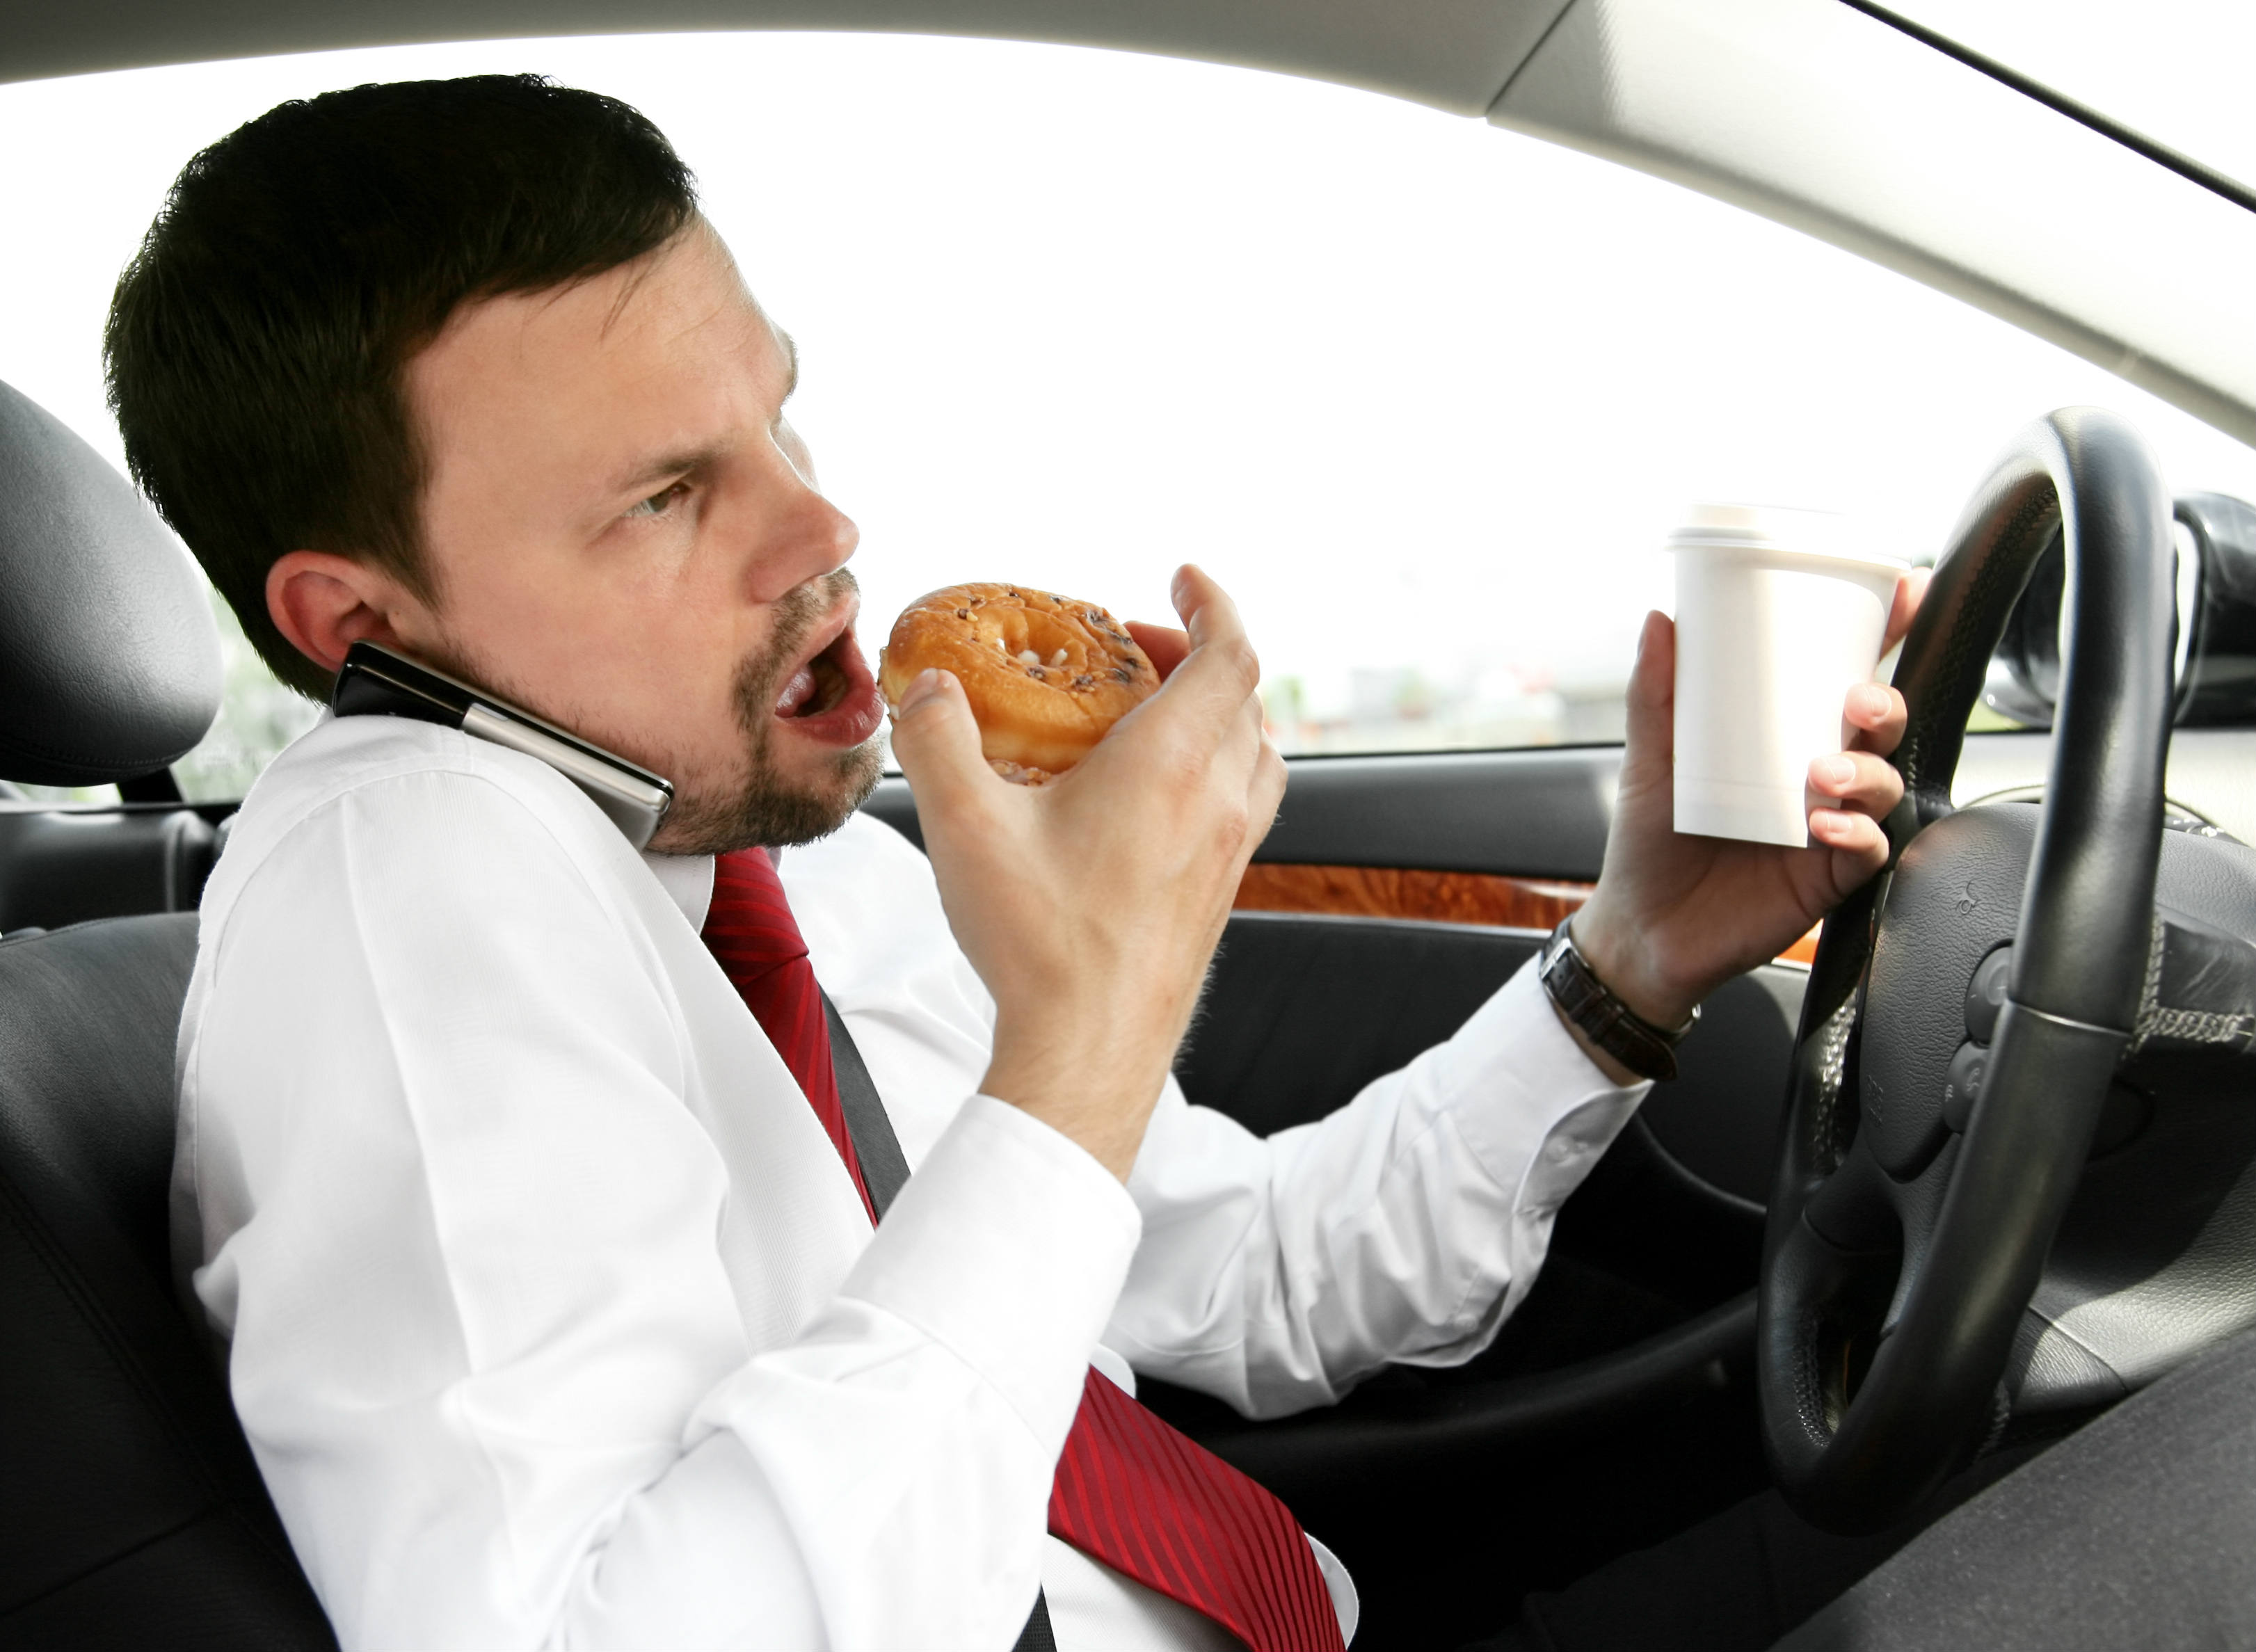 Eating, drinking, smoking: survey reveals the most common distractions for drivers